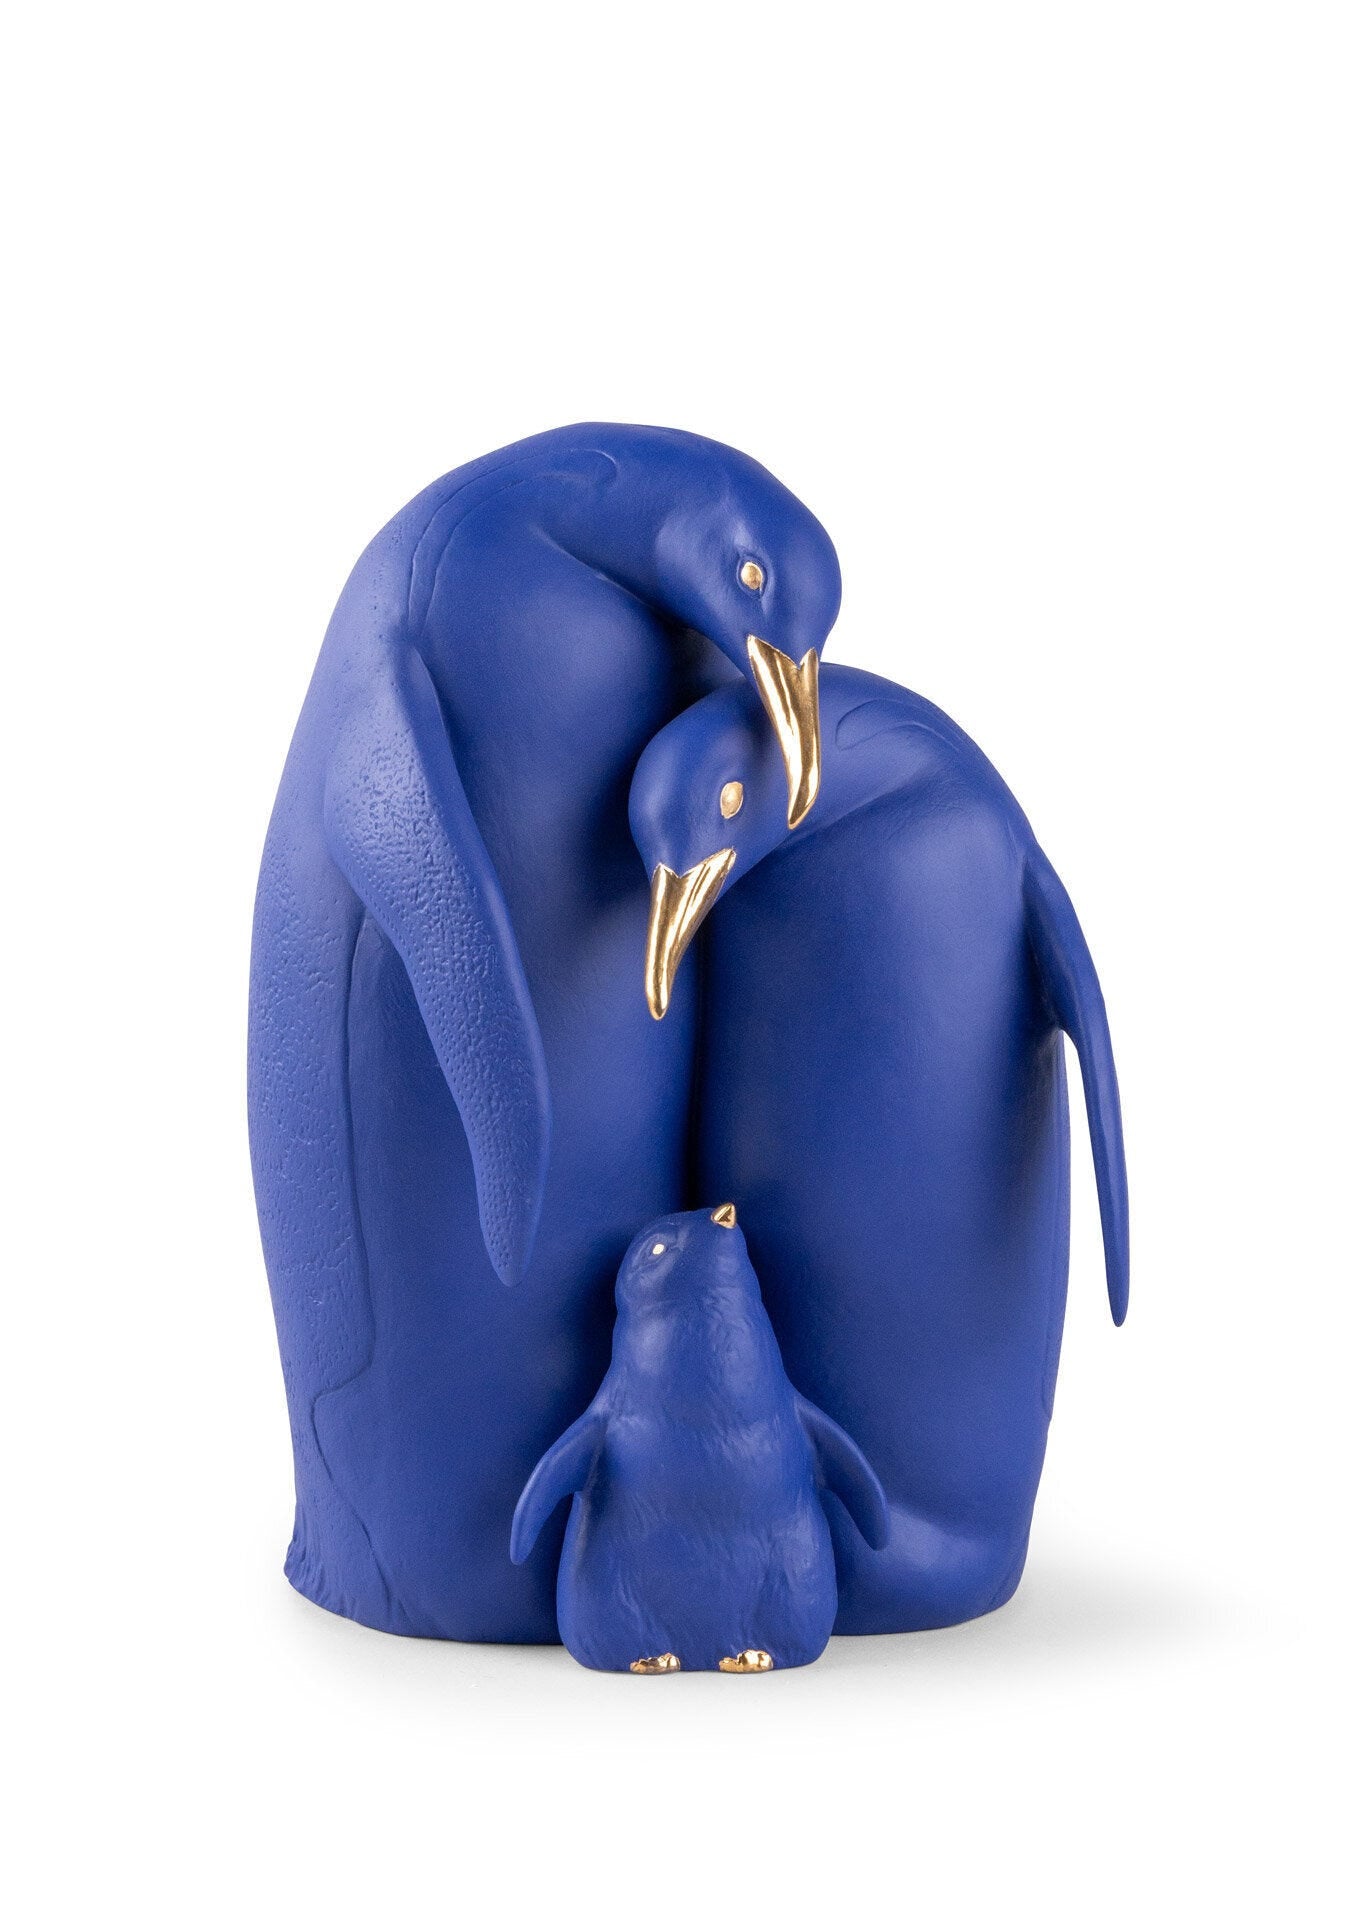 Penguin Family Sculpture Limited Edition Blue Gold